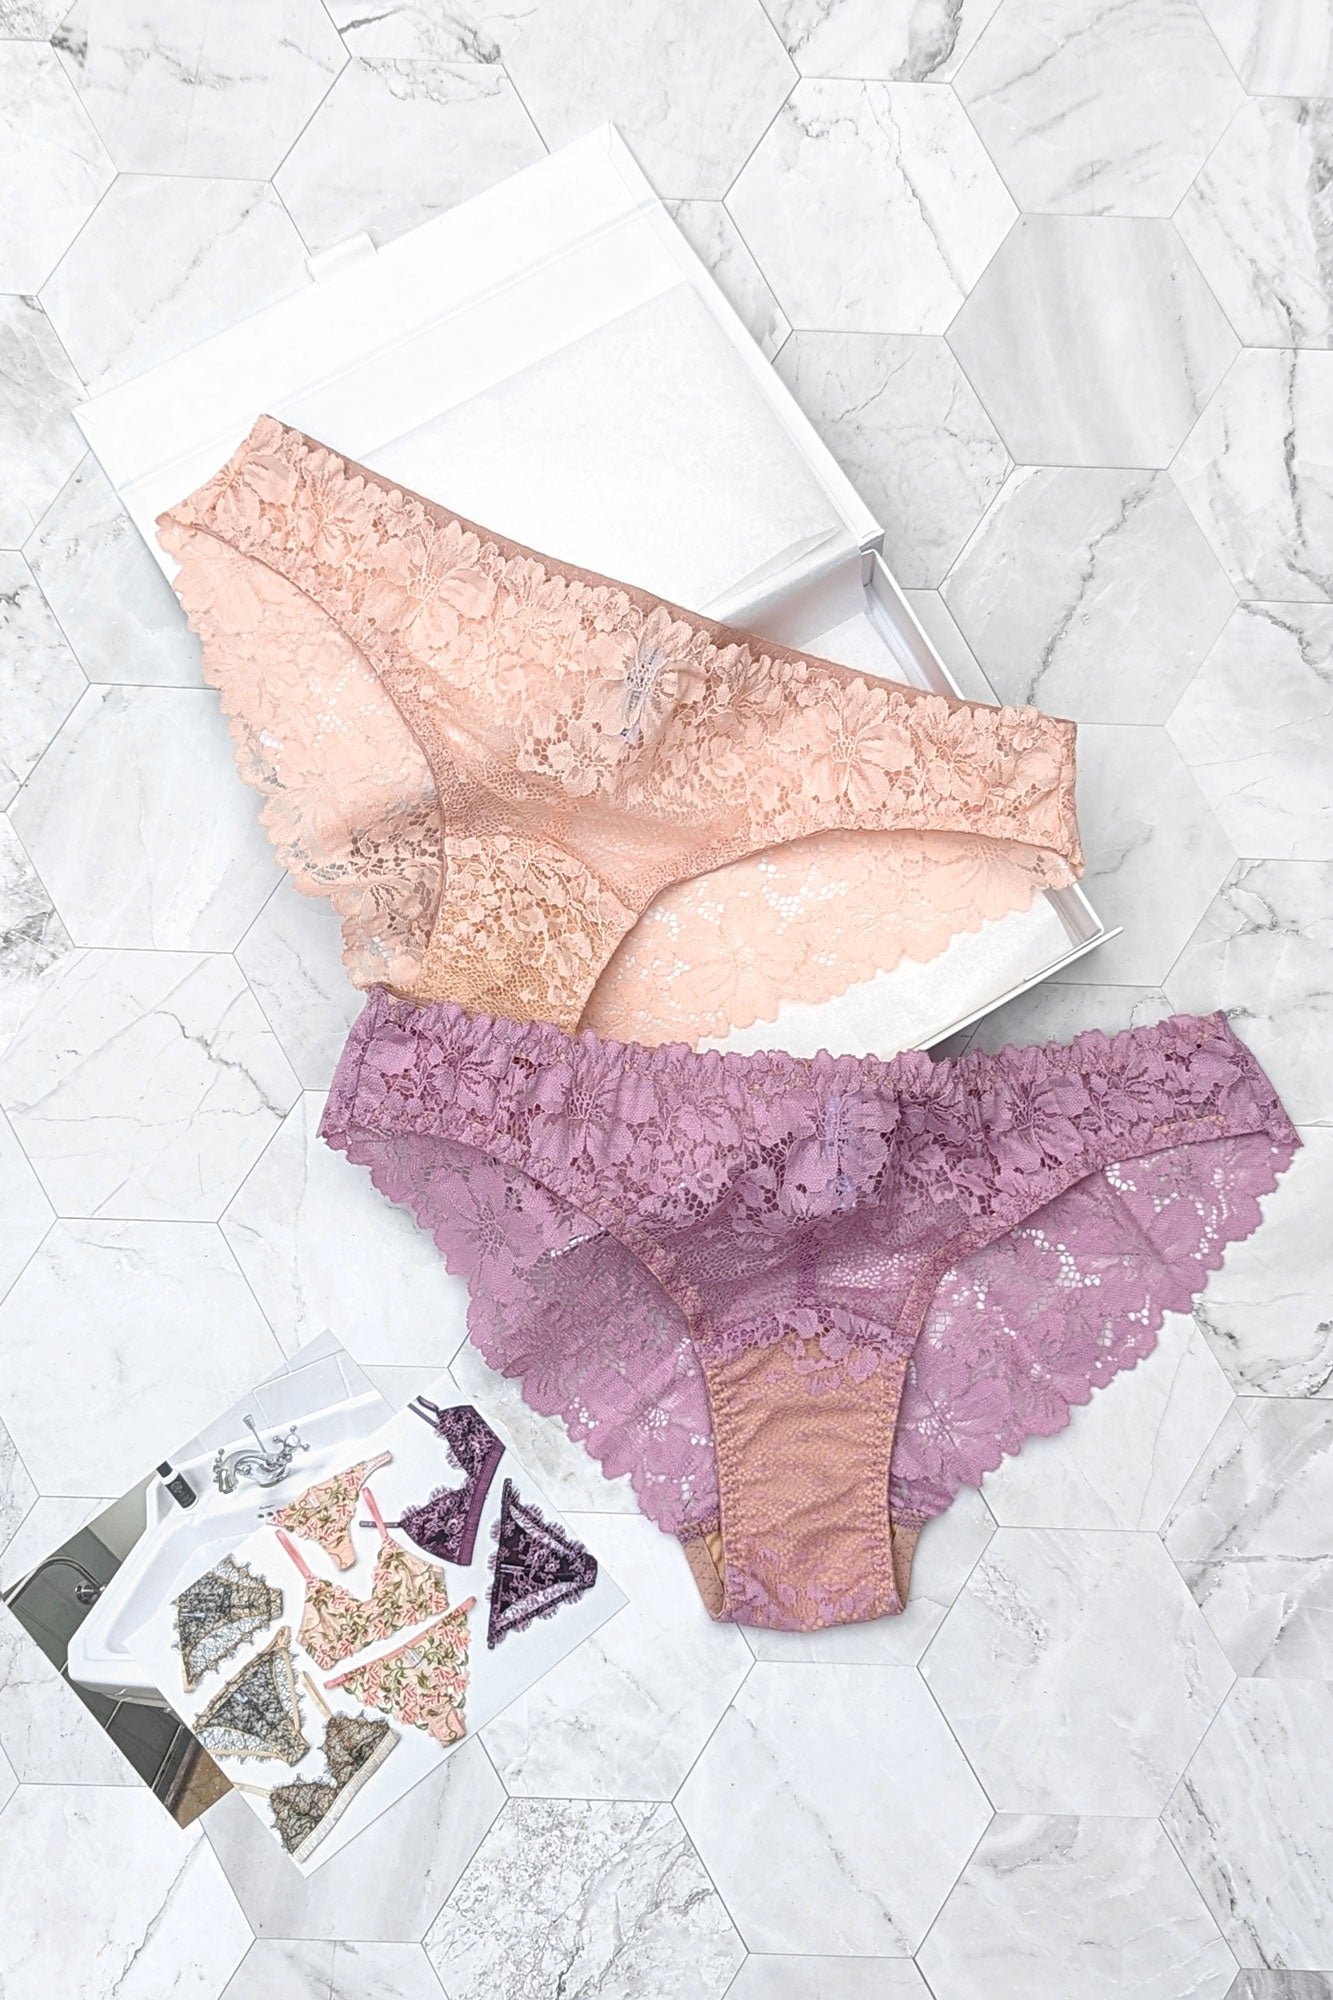 Victoria's Secret PINK - READY? 󾍒 10 for $35 panties exclusively